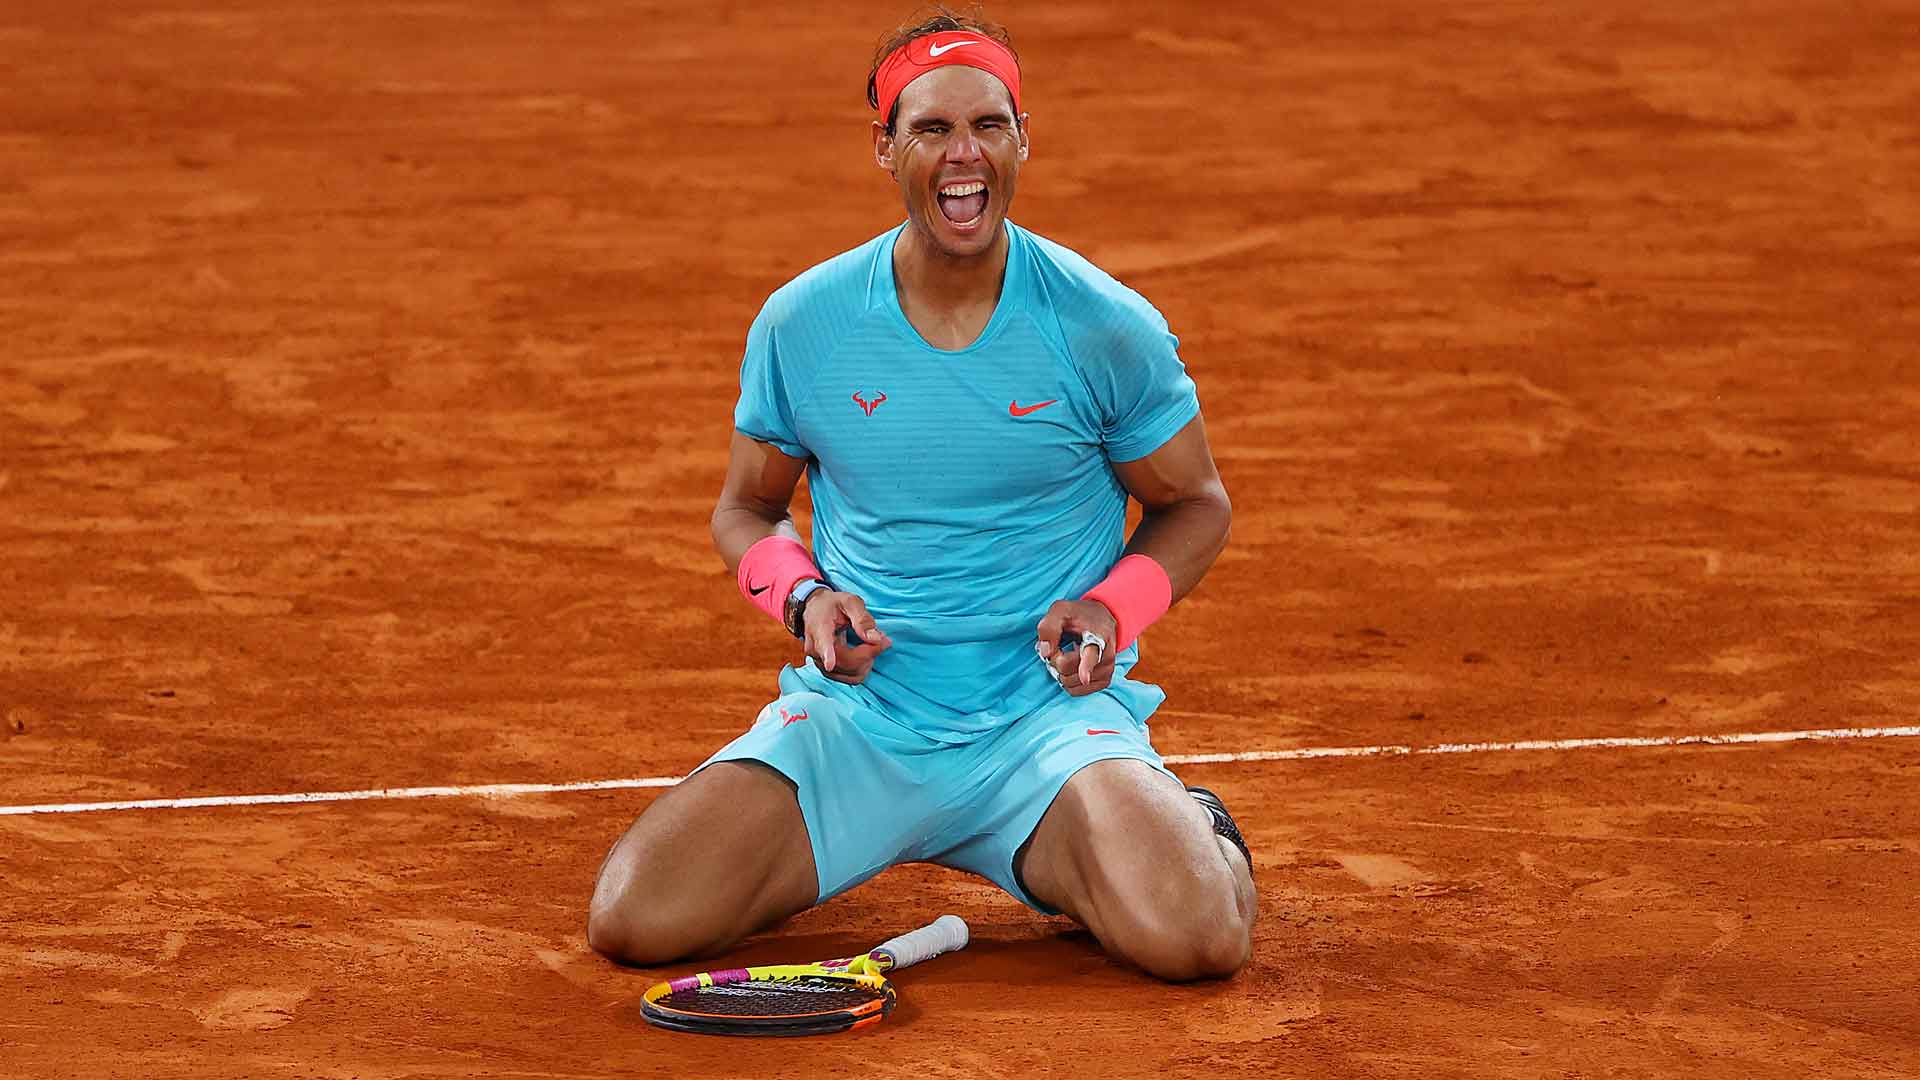 Rafael Nadal overpowers Novak Djokovic 6-0, 6-2, 7-5 at Roland Garros to match Roger Federer’s all-time record haul of 20 Grand Slam crowns.